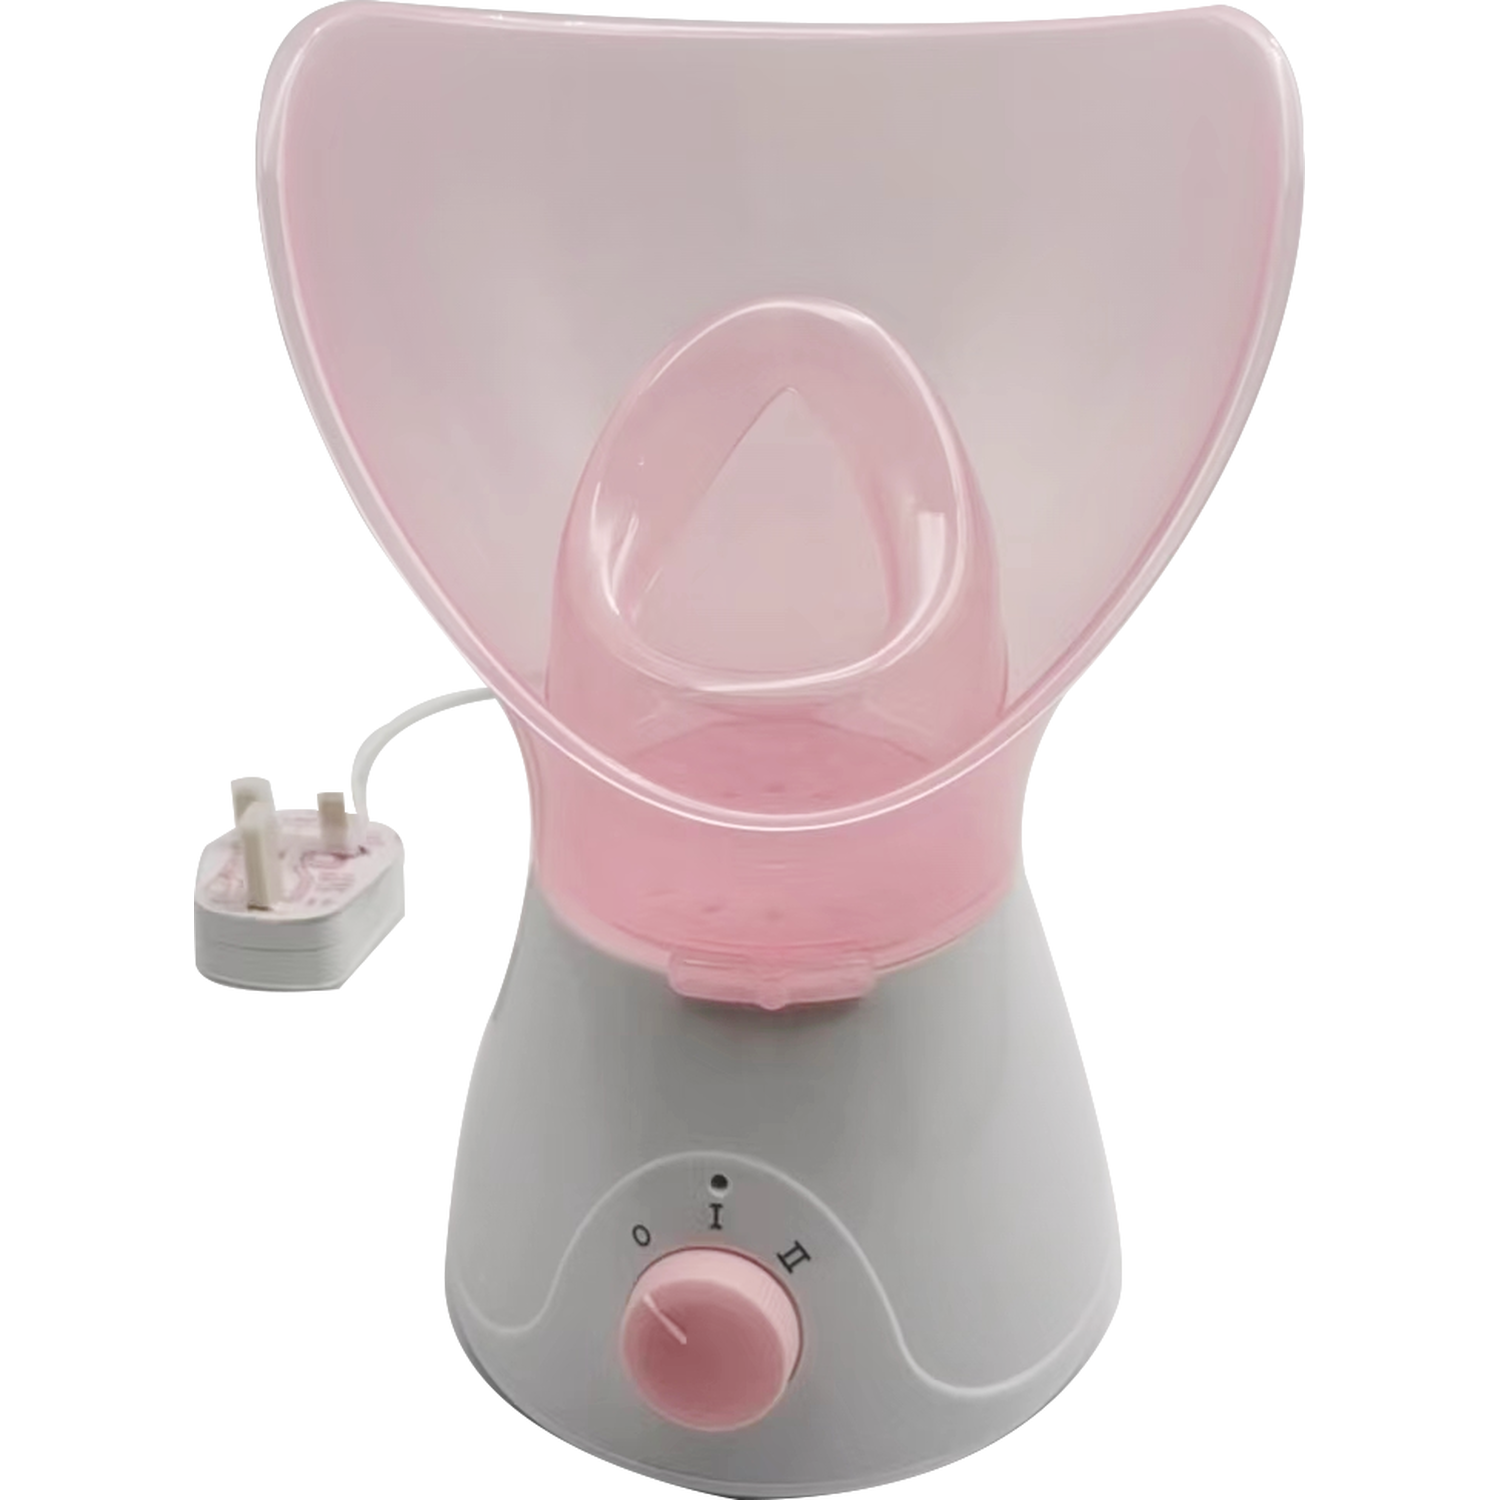 Colour Company Pink Face Steamer Image 1